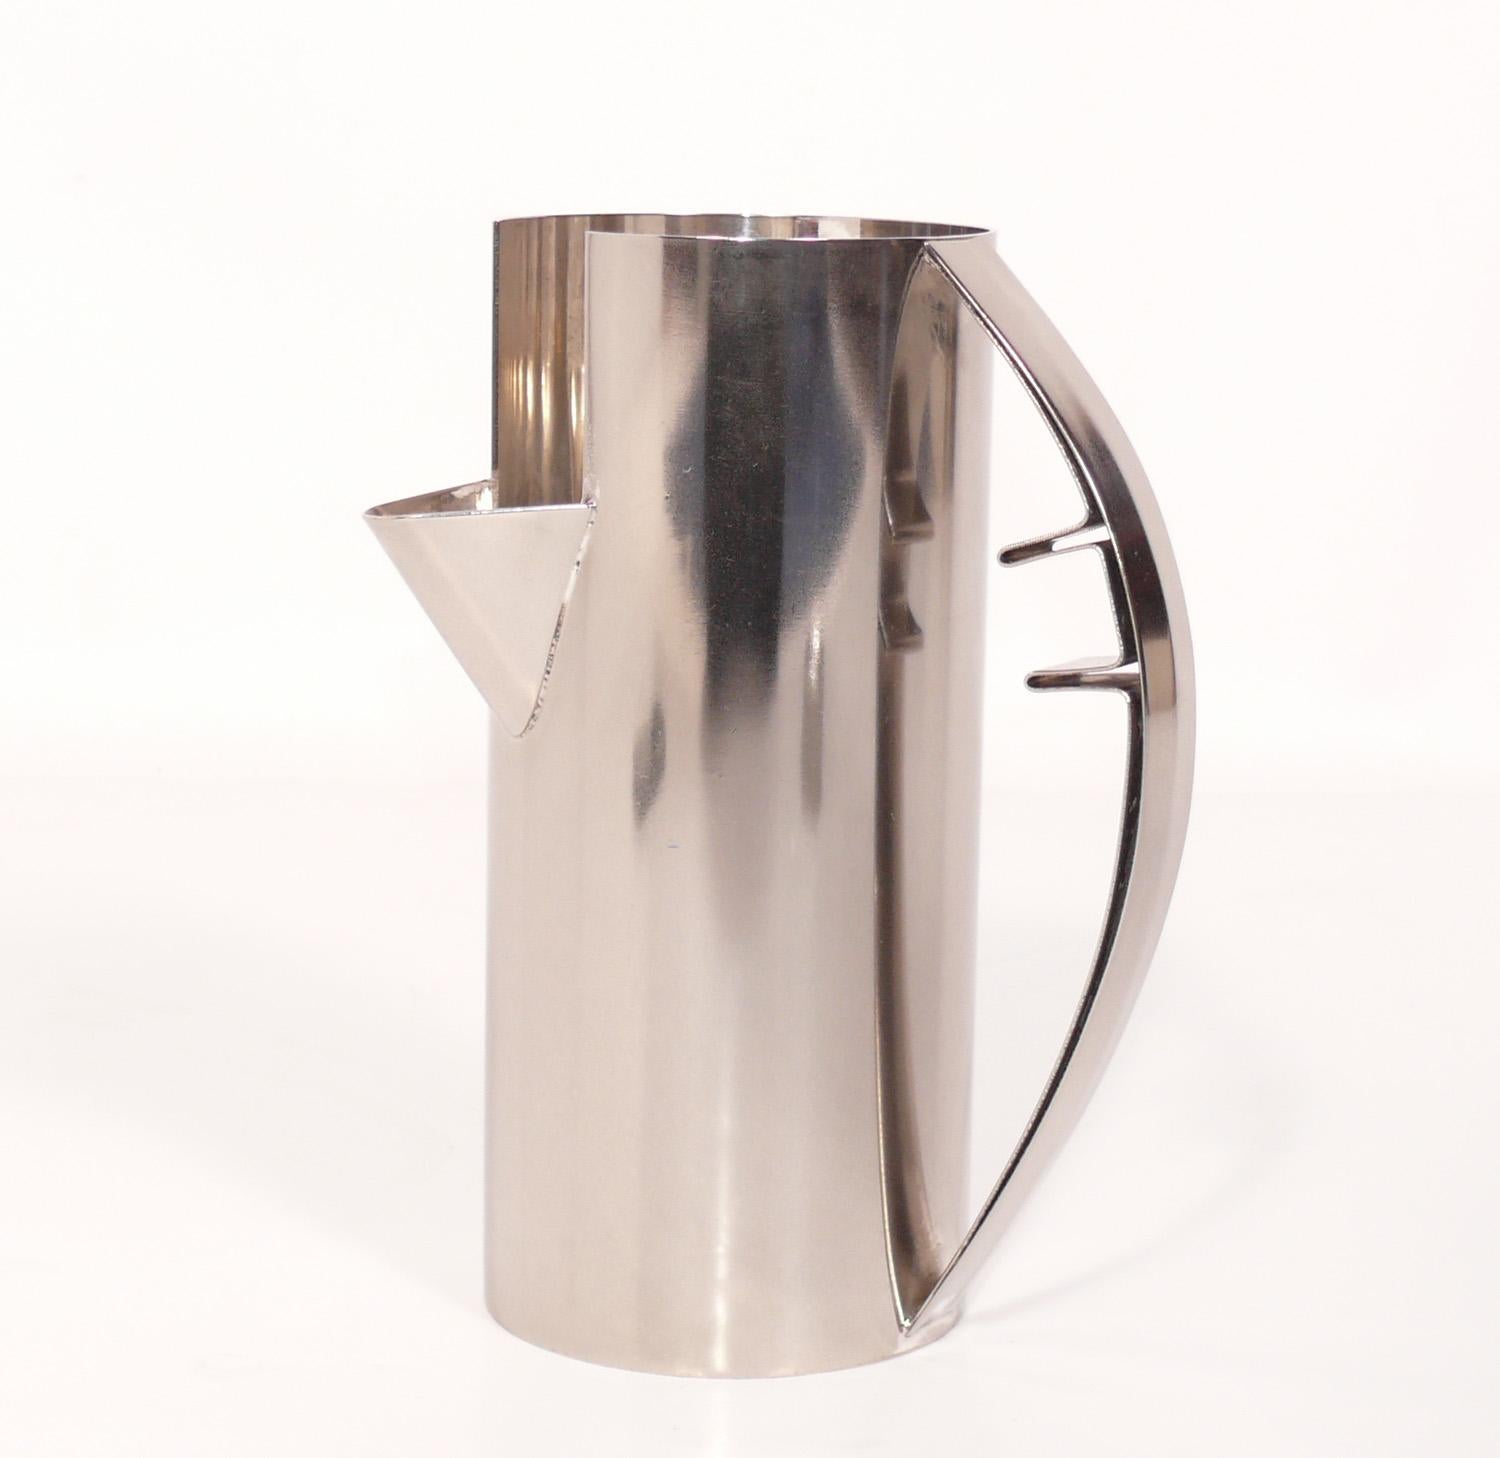 Modernist Silver Plate Pitcher, designed by Carlo Scarpa for Cleto Munari, Italy, circa 1970s. It has been hand polished.